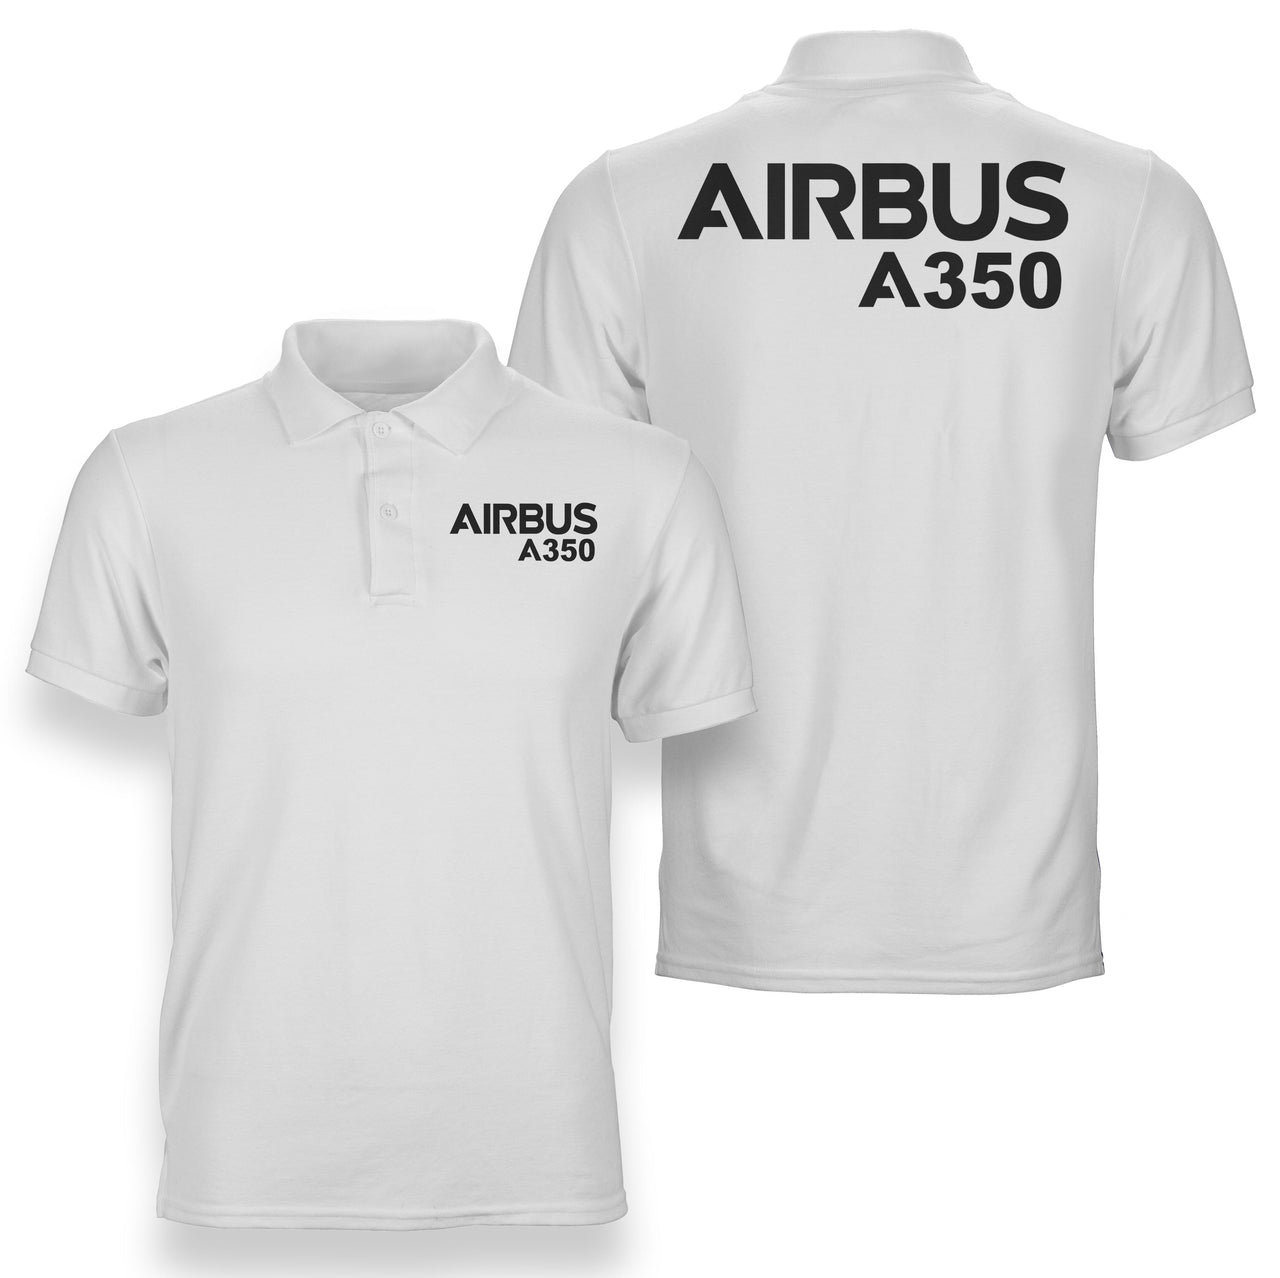 Airbus A350 & Text Designed Double Side Polo T-Shirts